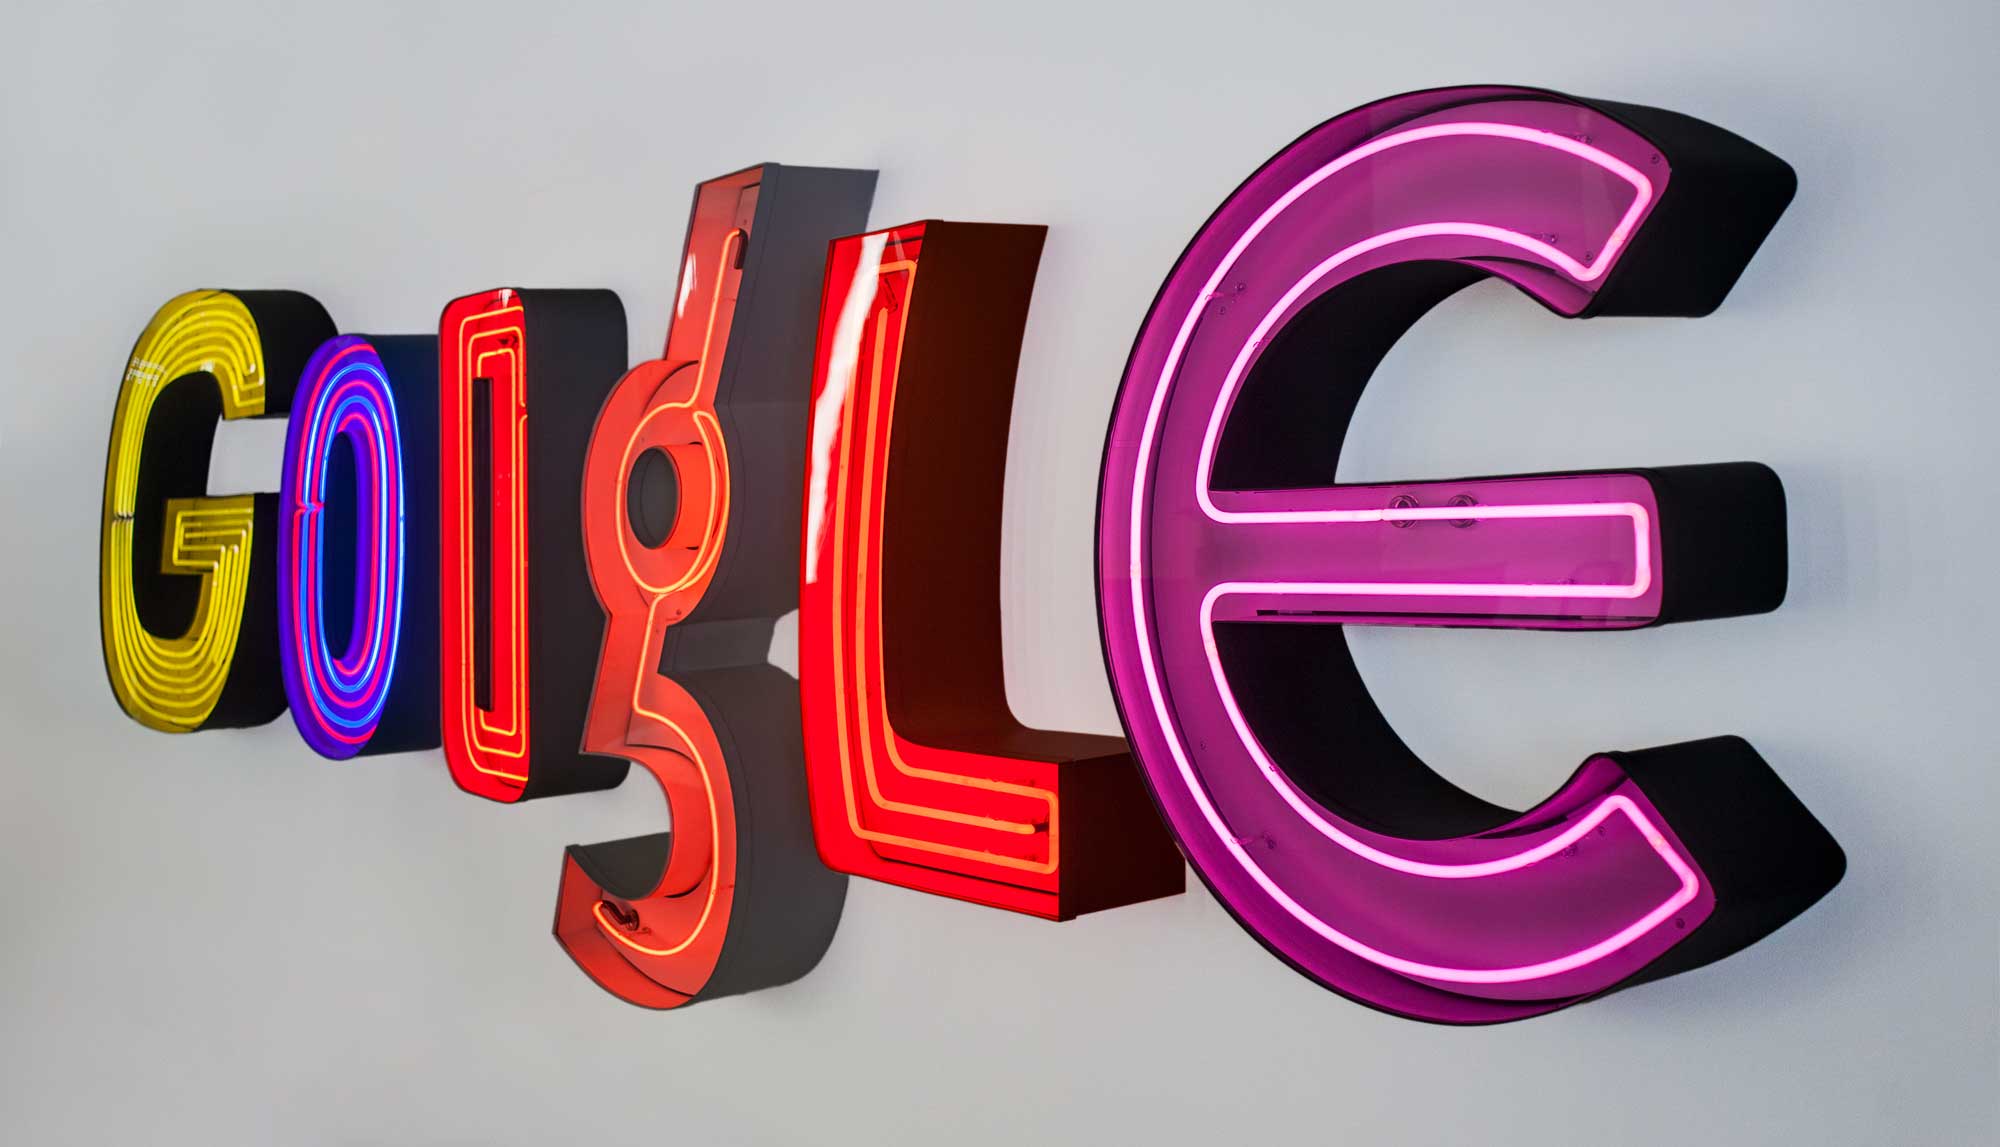 Google neon sign for the Google Doodle in New York